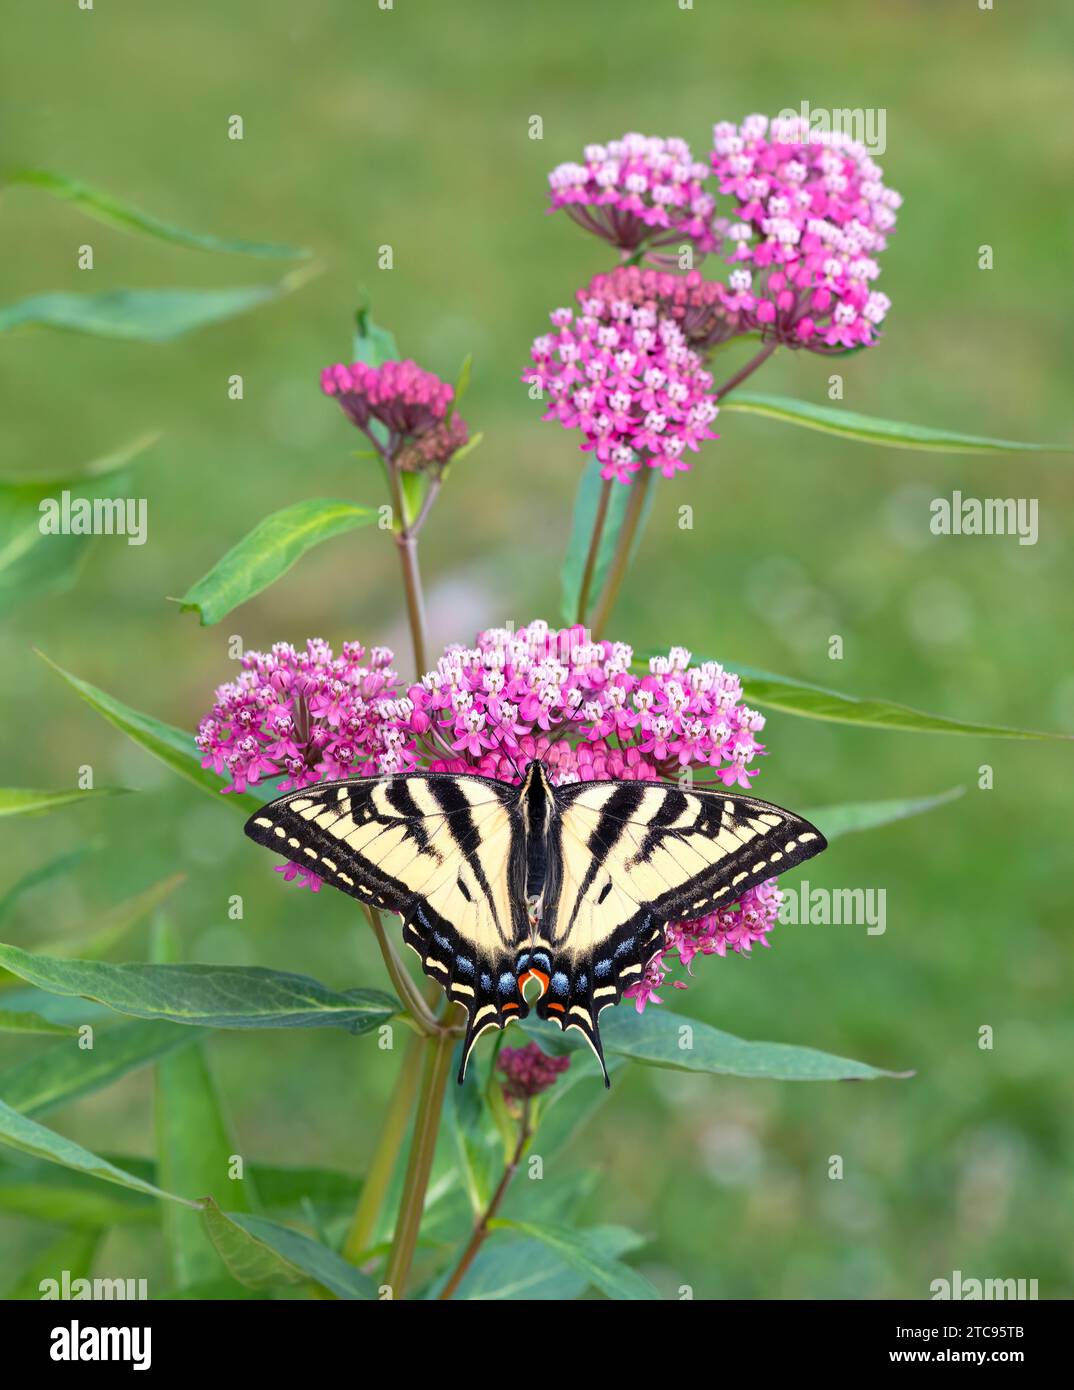 Macro of a western tiger swallowtail butterfly (papilio rutulus) on a rose swamp milkweed (asclepias) flower. Top view with wings spread open. Stock Photo